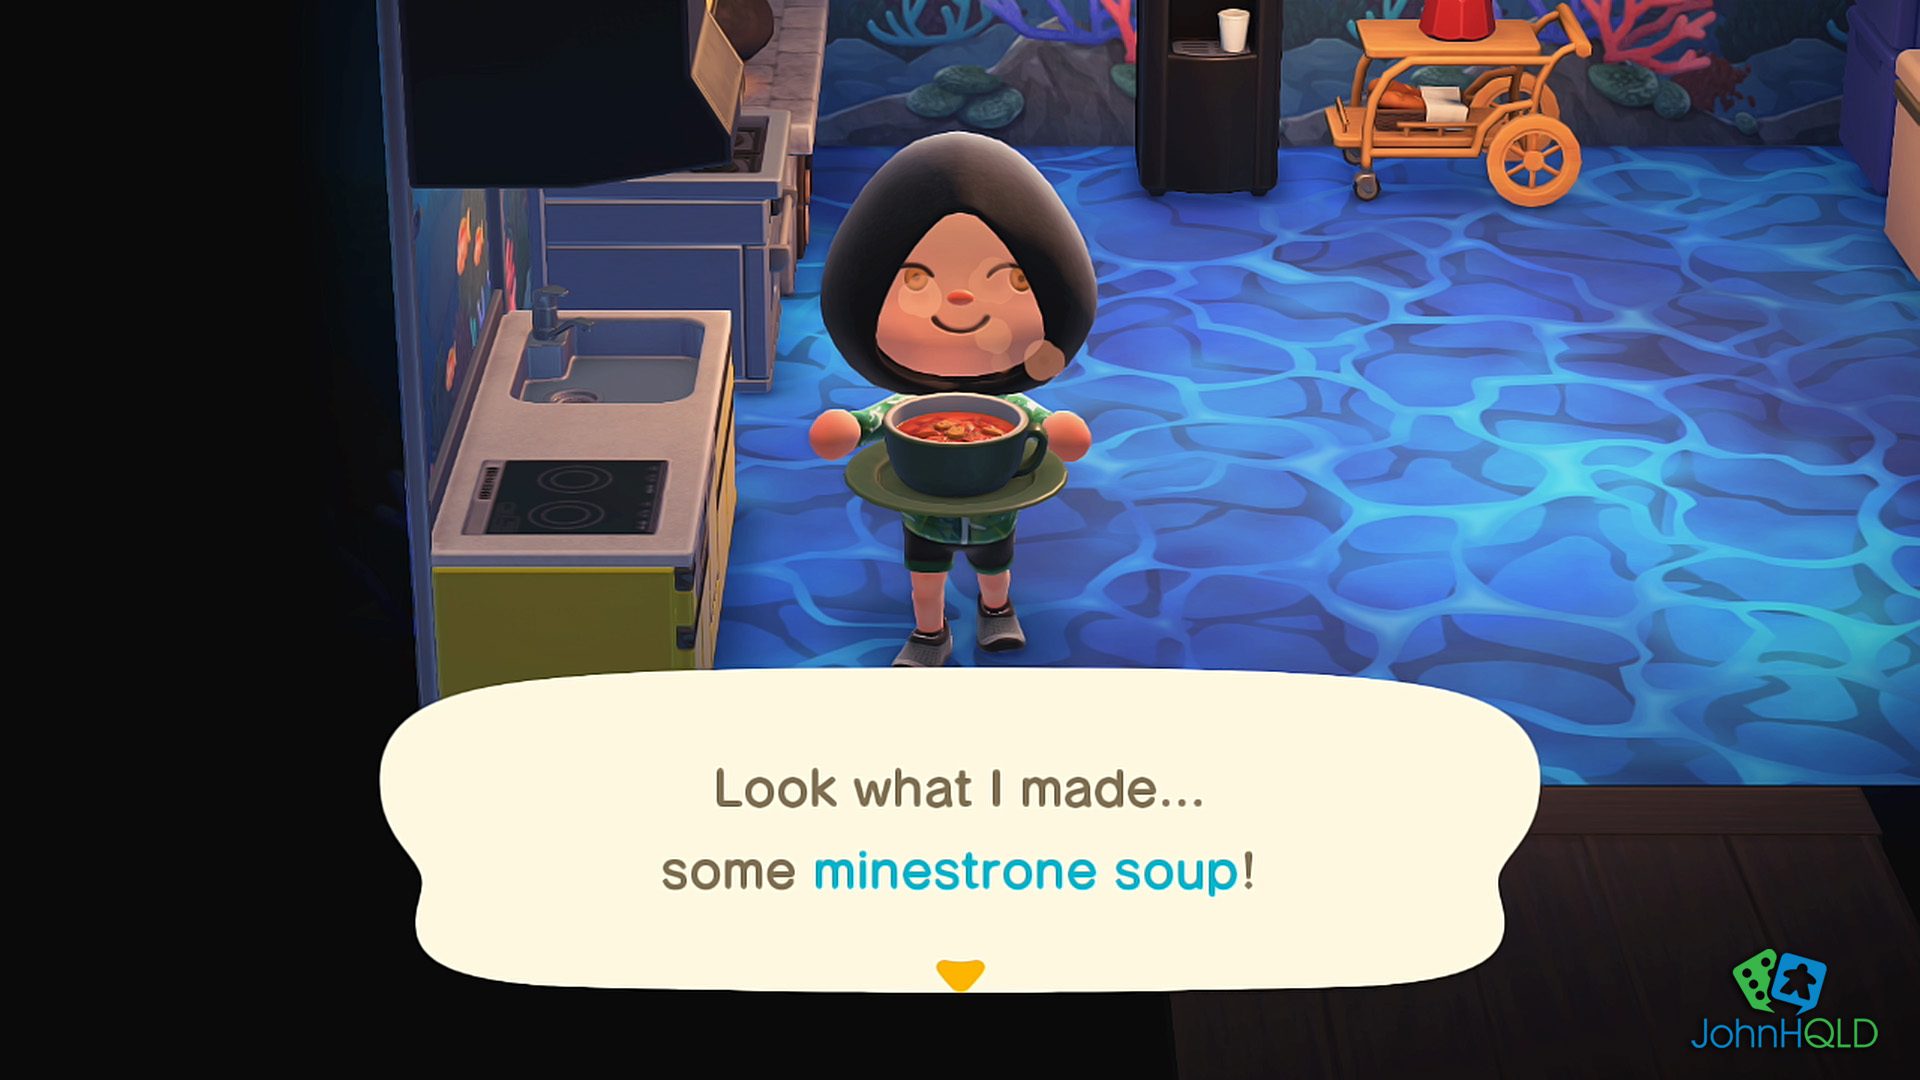 20220228 Animal Crossing New Horizons 2022022607064467 - Check out my Minestrone